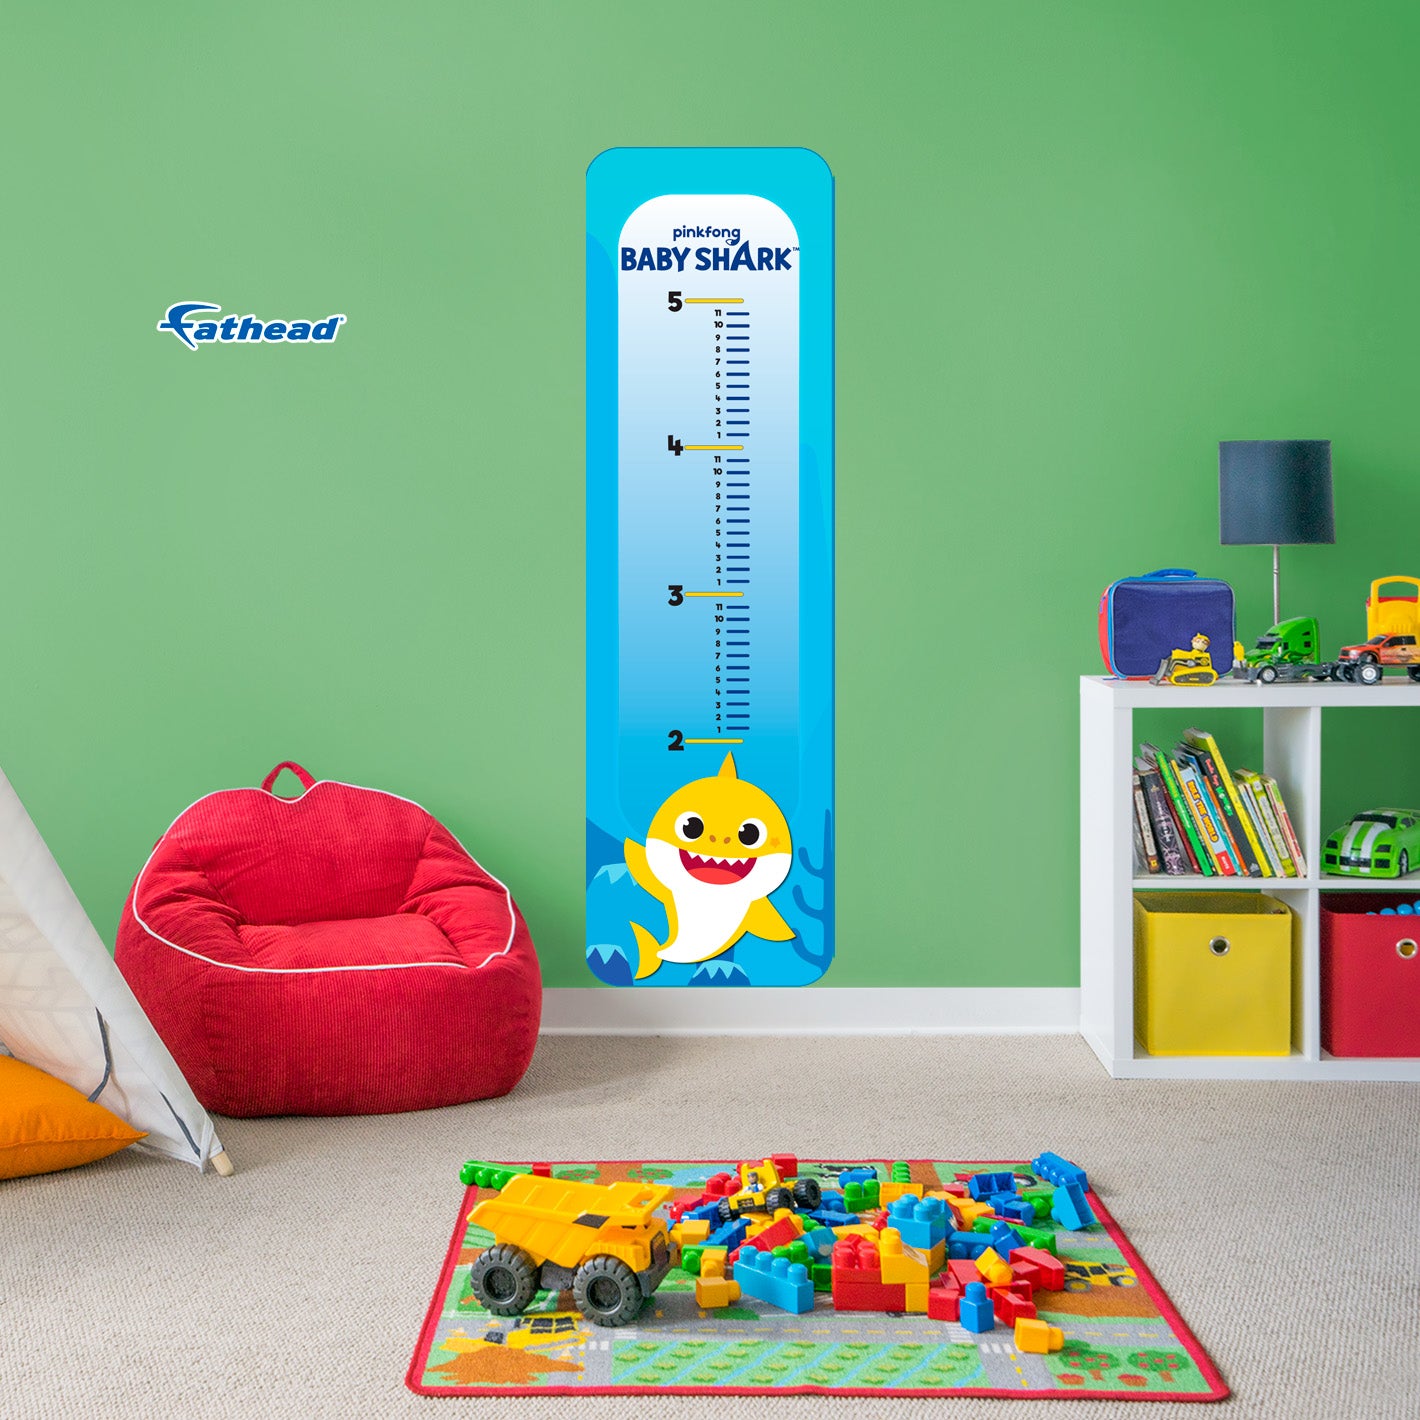 Baby Shark:  Underwater Growth Chart        - Officially Licensed Nickelodeon Removable     Adhesive Decal